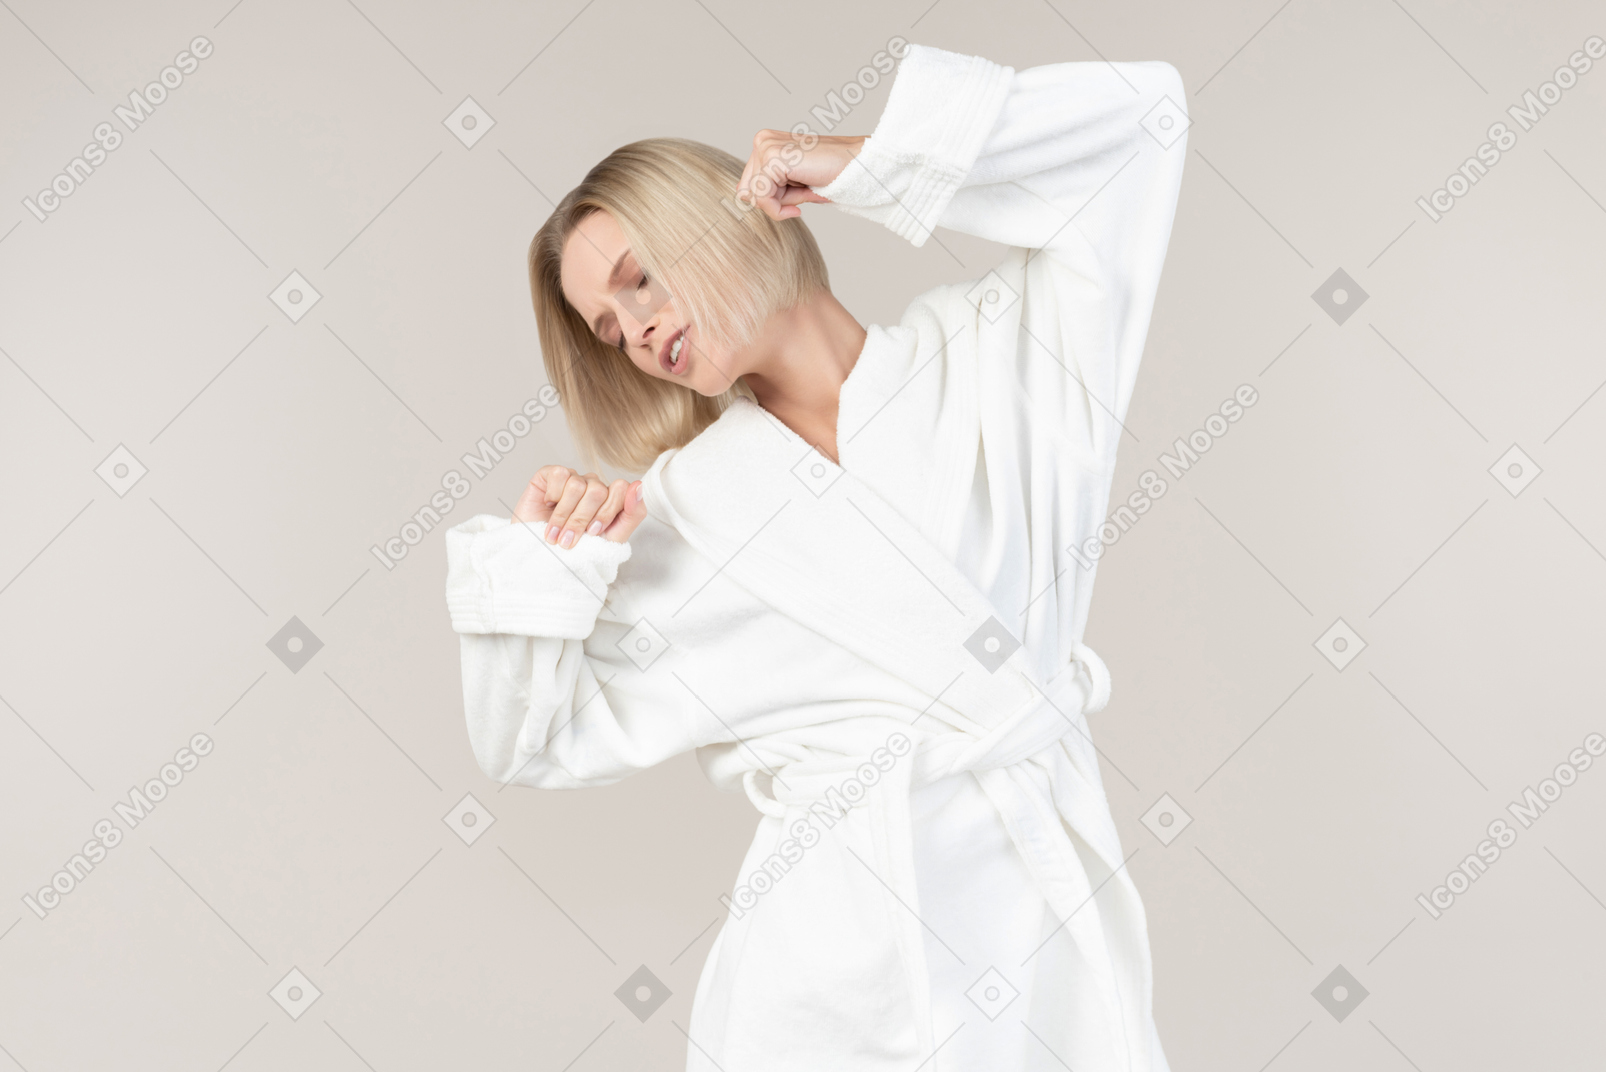 Young woman in bathrobe stretching her arms